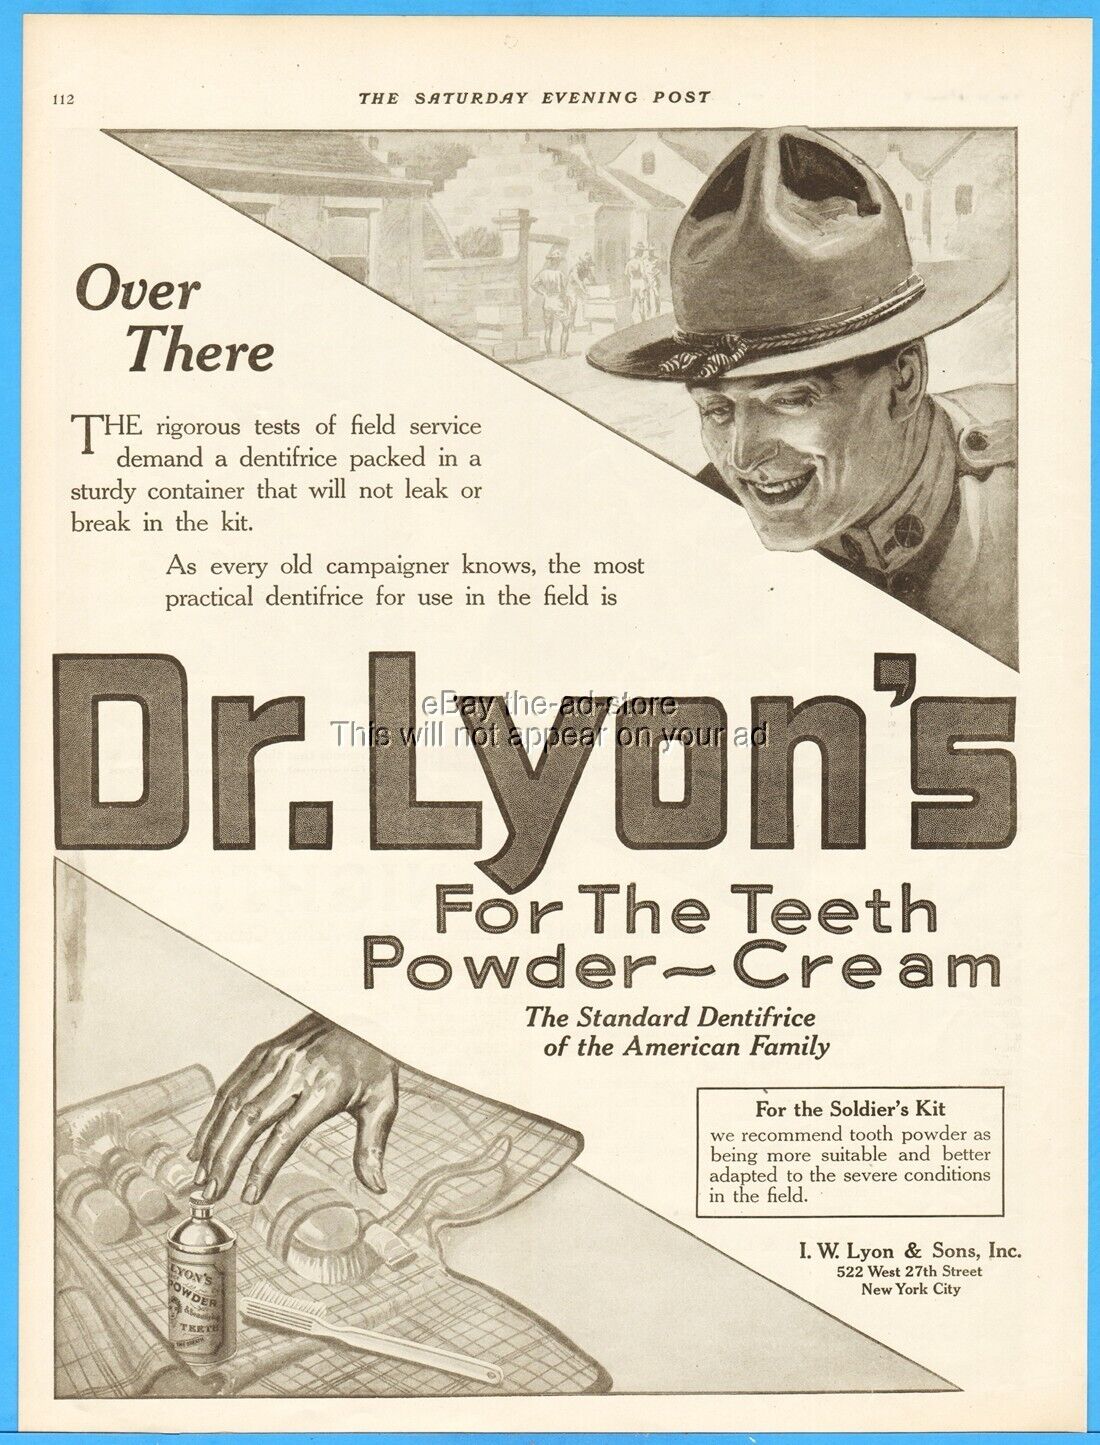 1917 Dr Lyon\'s Tooth Powder Ad WWI Soldier\'s Kit Art  522 W 22nd St New York NY